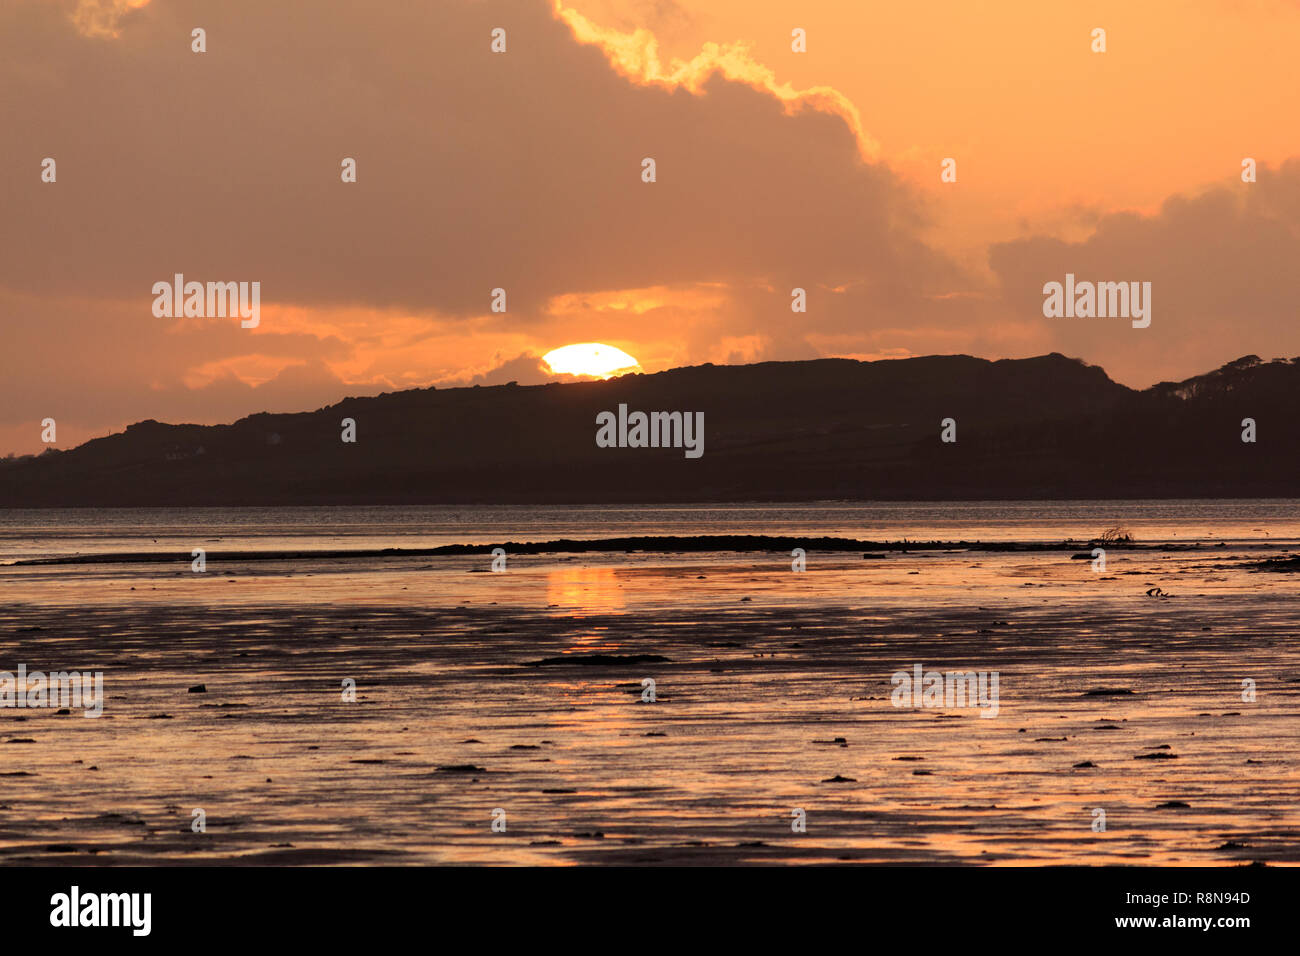 Golden Sunset over Tralee Bay viewed from Blennerville Bridge near Tralee, County Kerry, Ireland Stock Photo